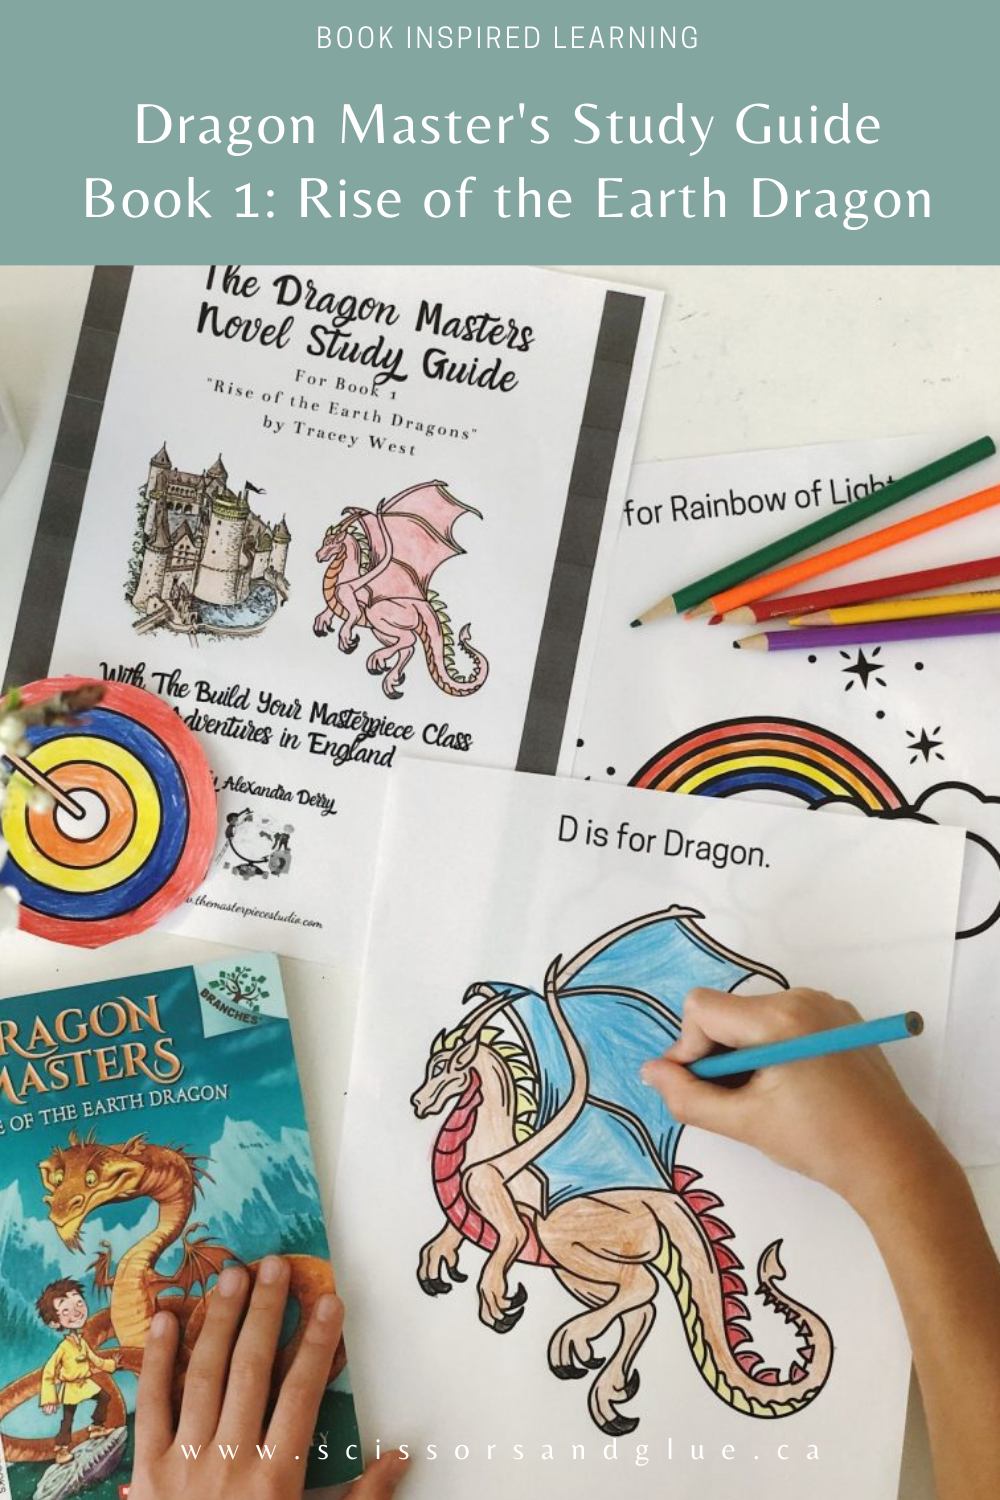 Dragon Masters Study Guide and coloring pages in action with child coloring.